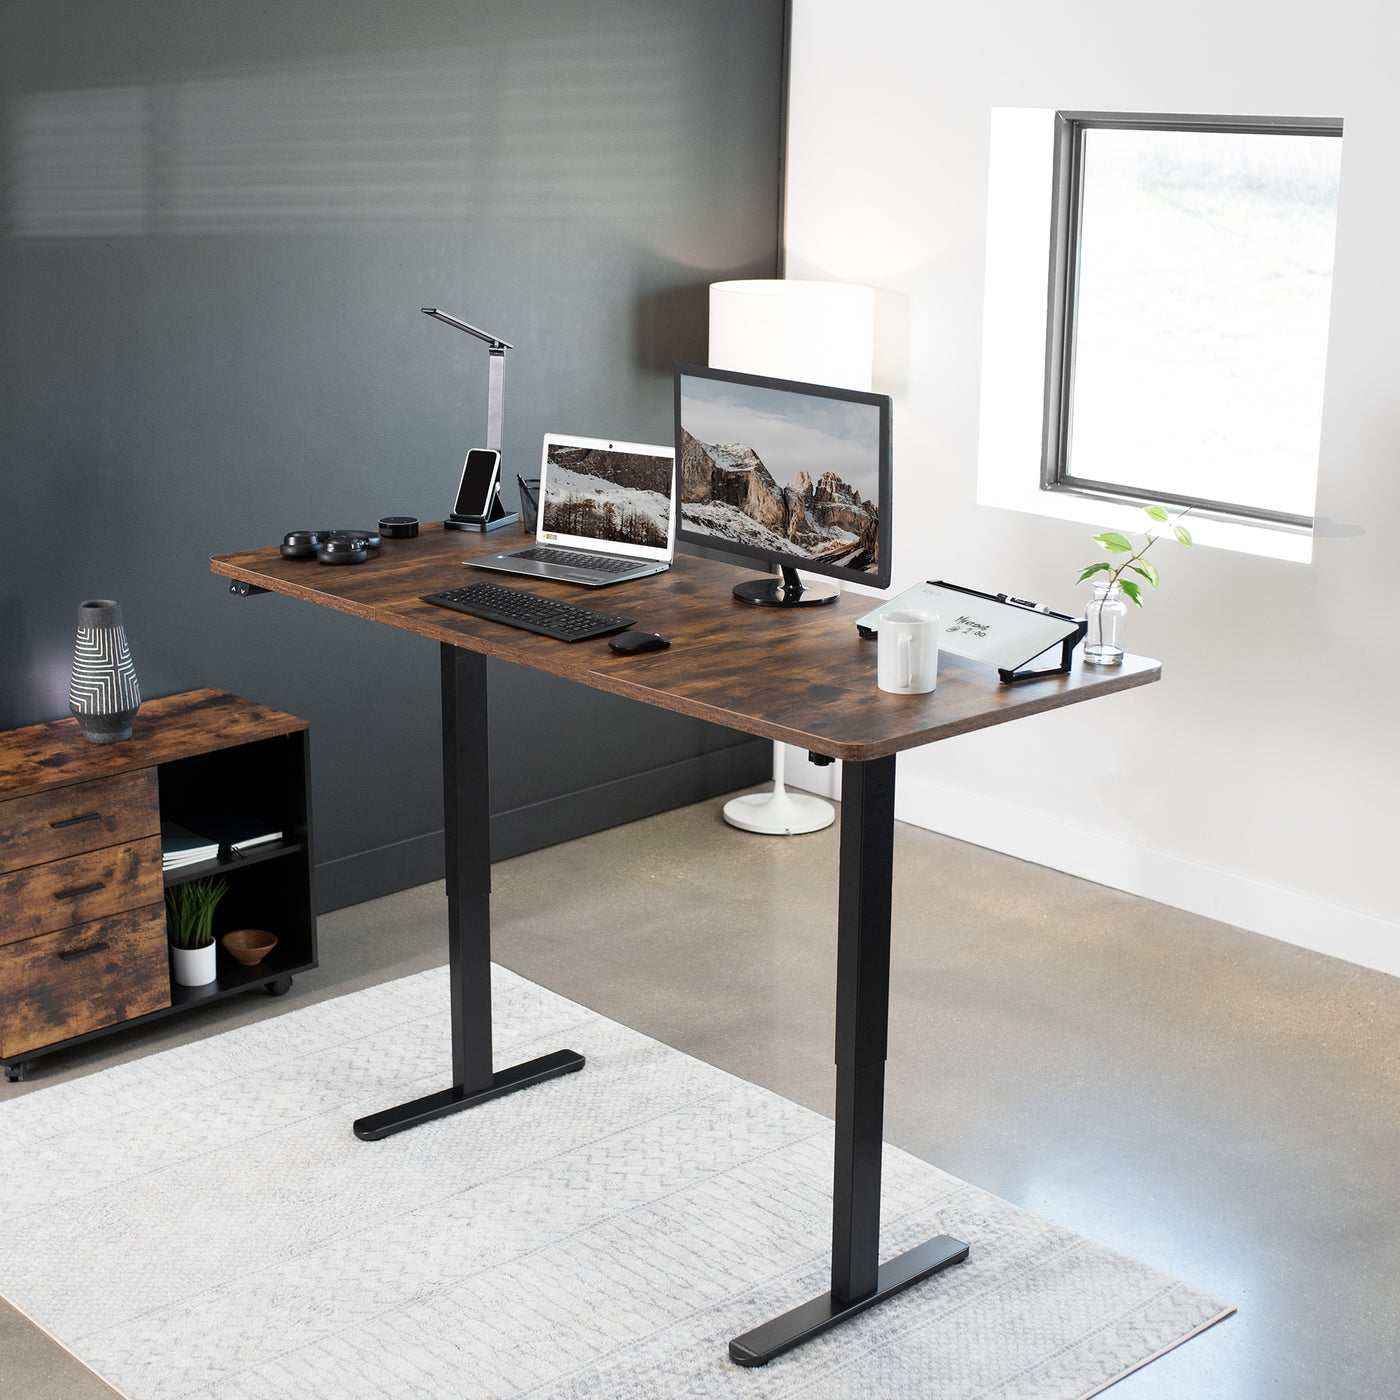 Rustic wide surface sturdy sit or stand active workstation with adjustable height using 2 button control panel.